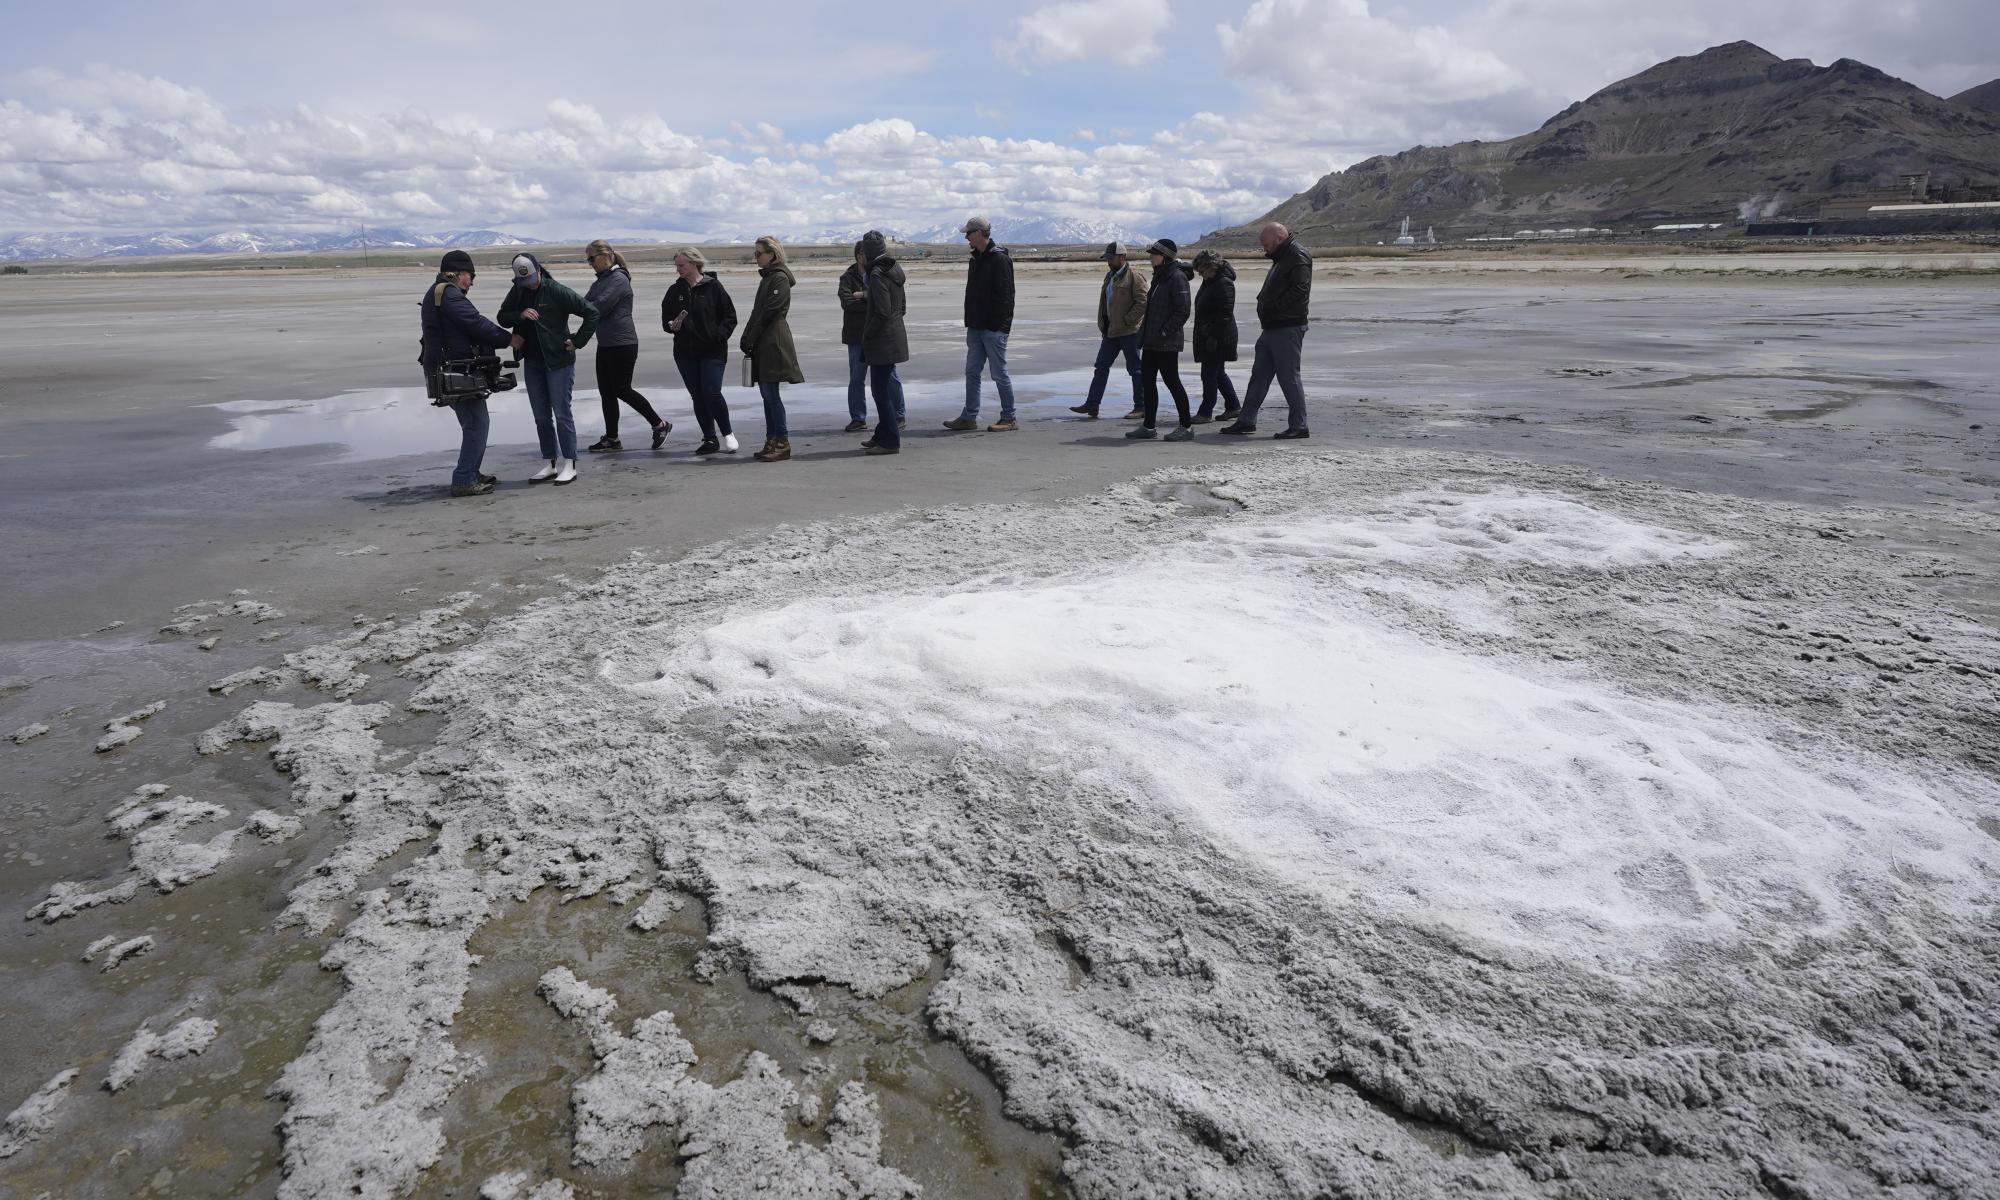 Utah’s Great Salt Lake hits new historic low amid drought in western US